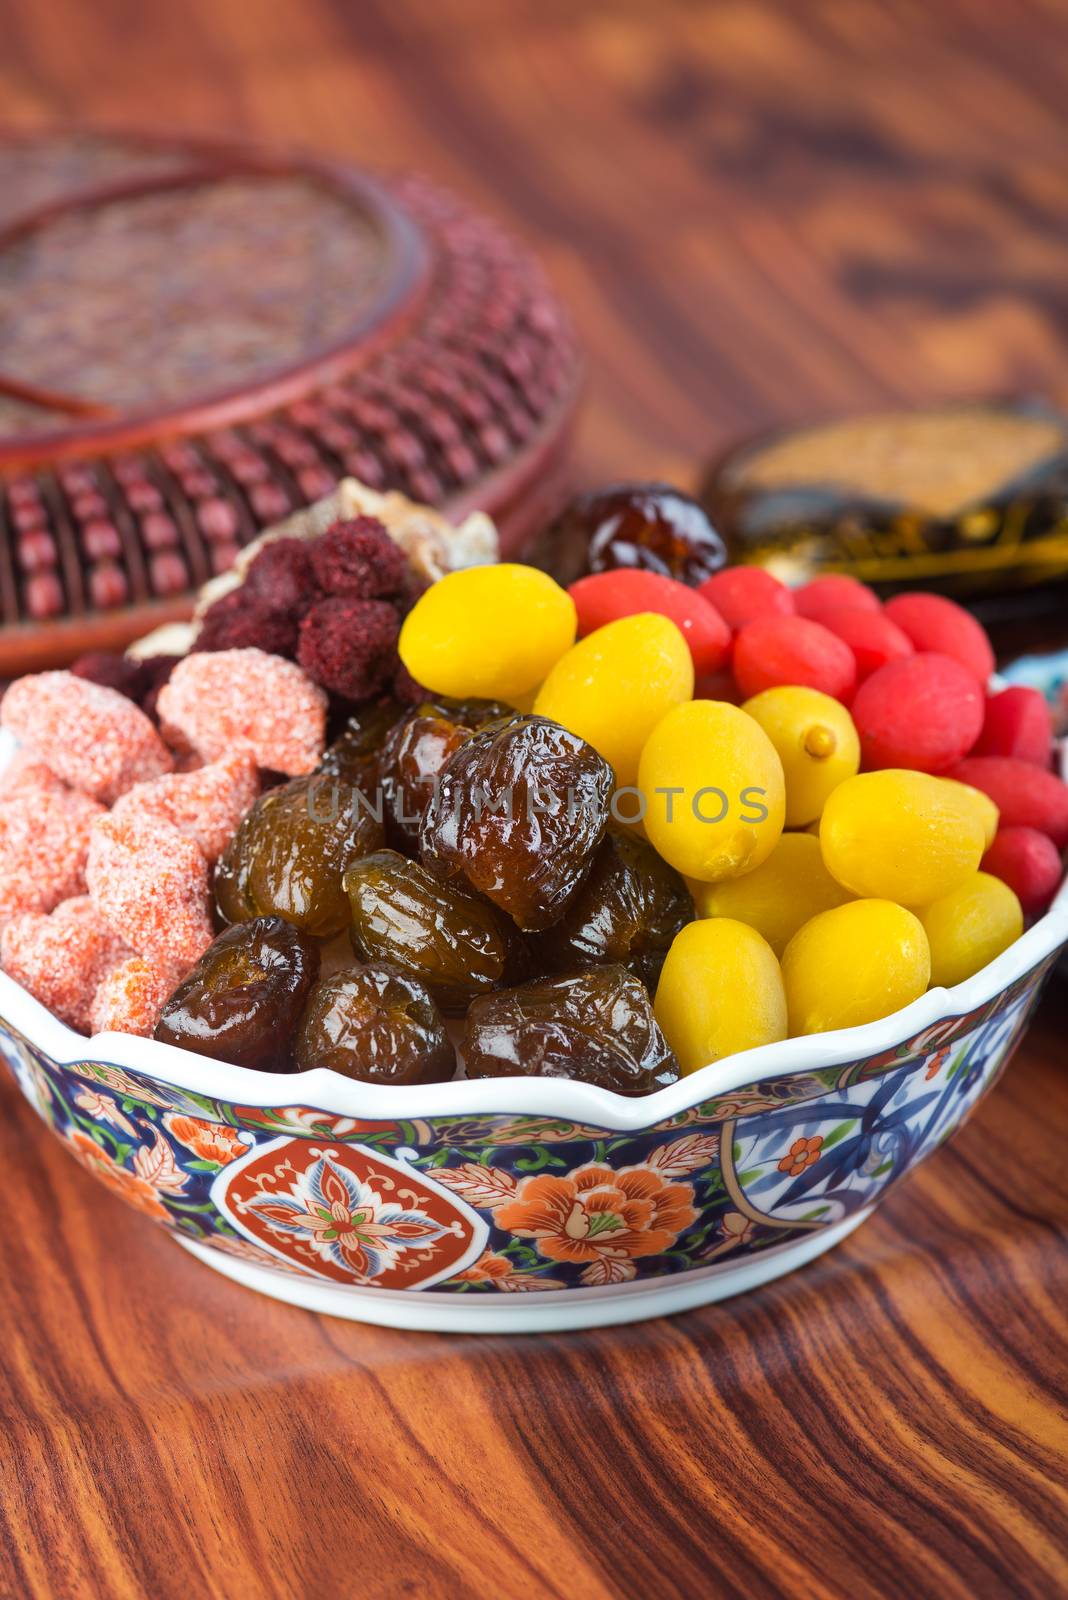 preserved fruits. chinese preserved fruits on the background by heinteh